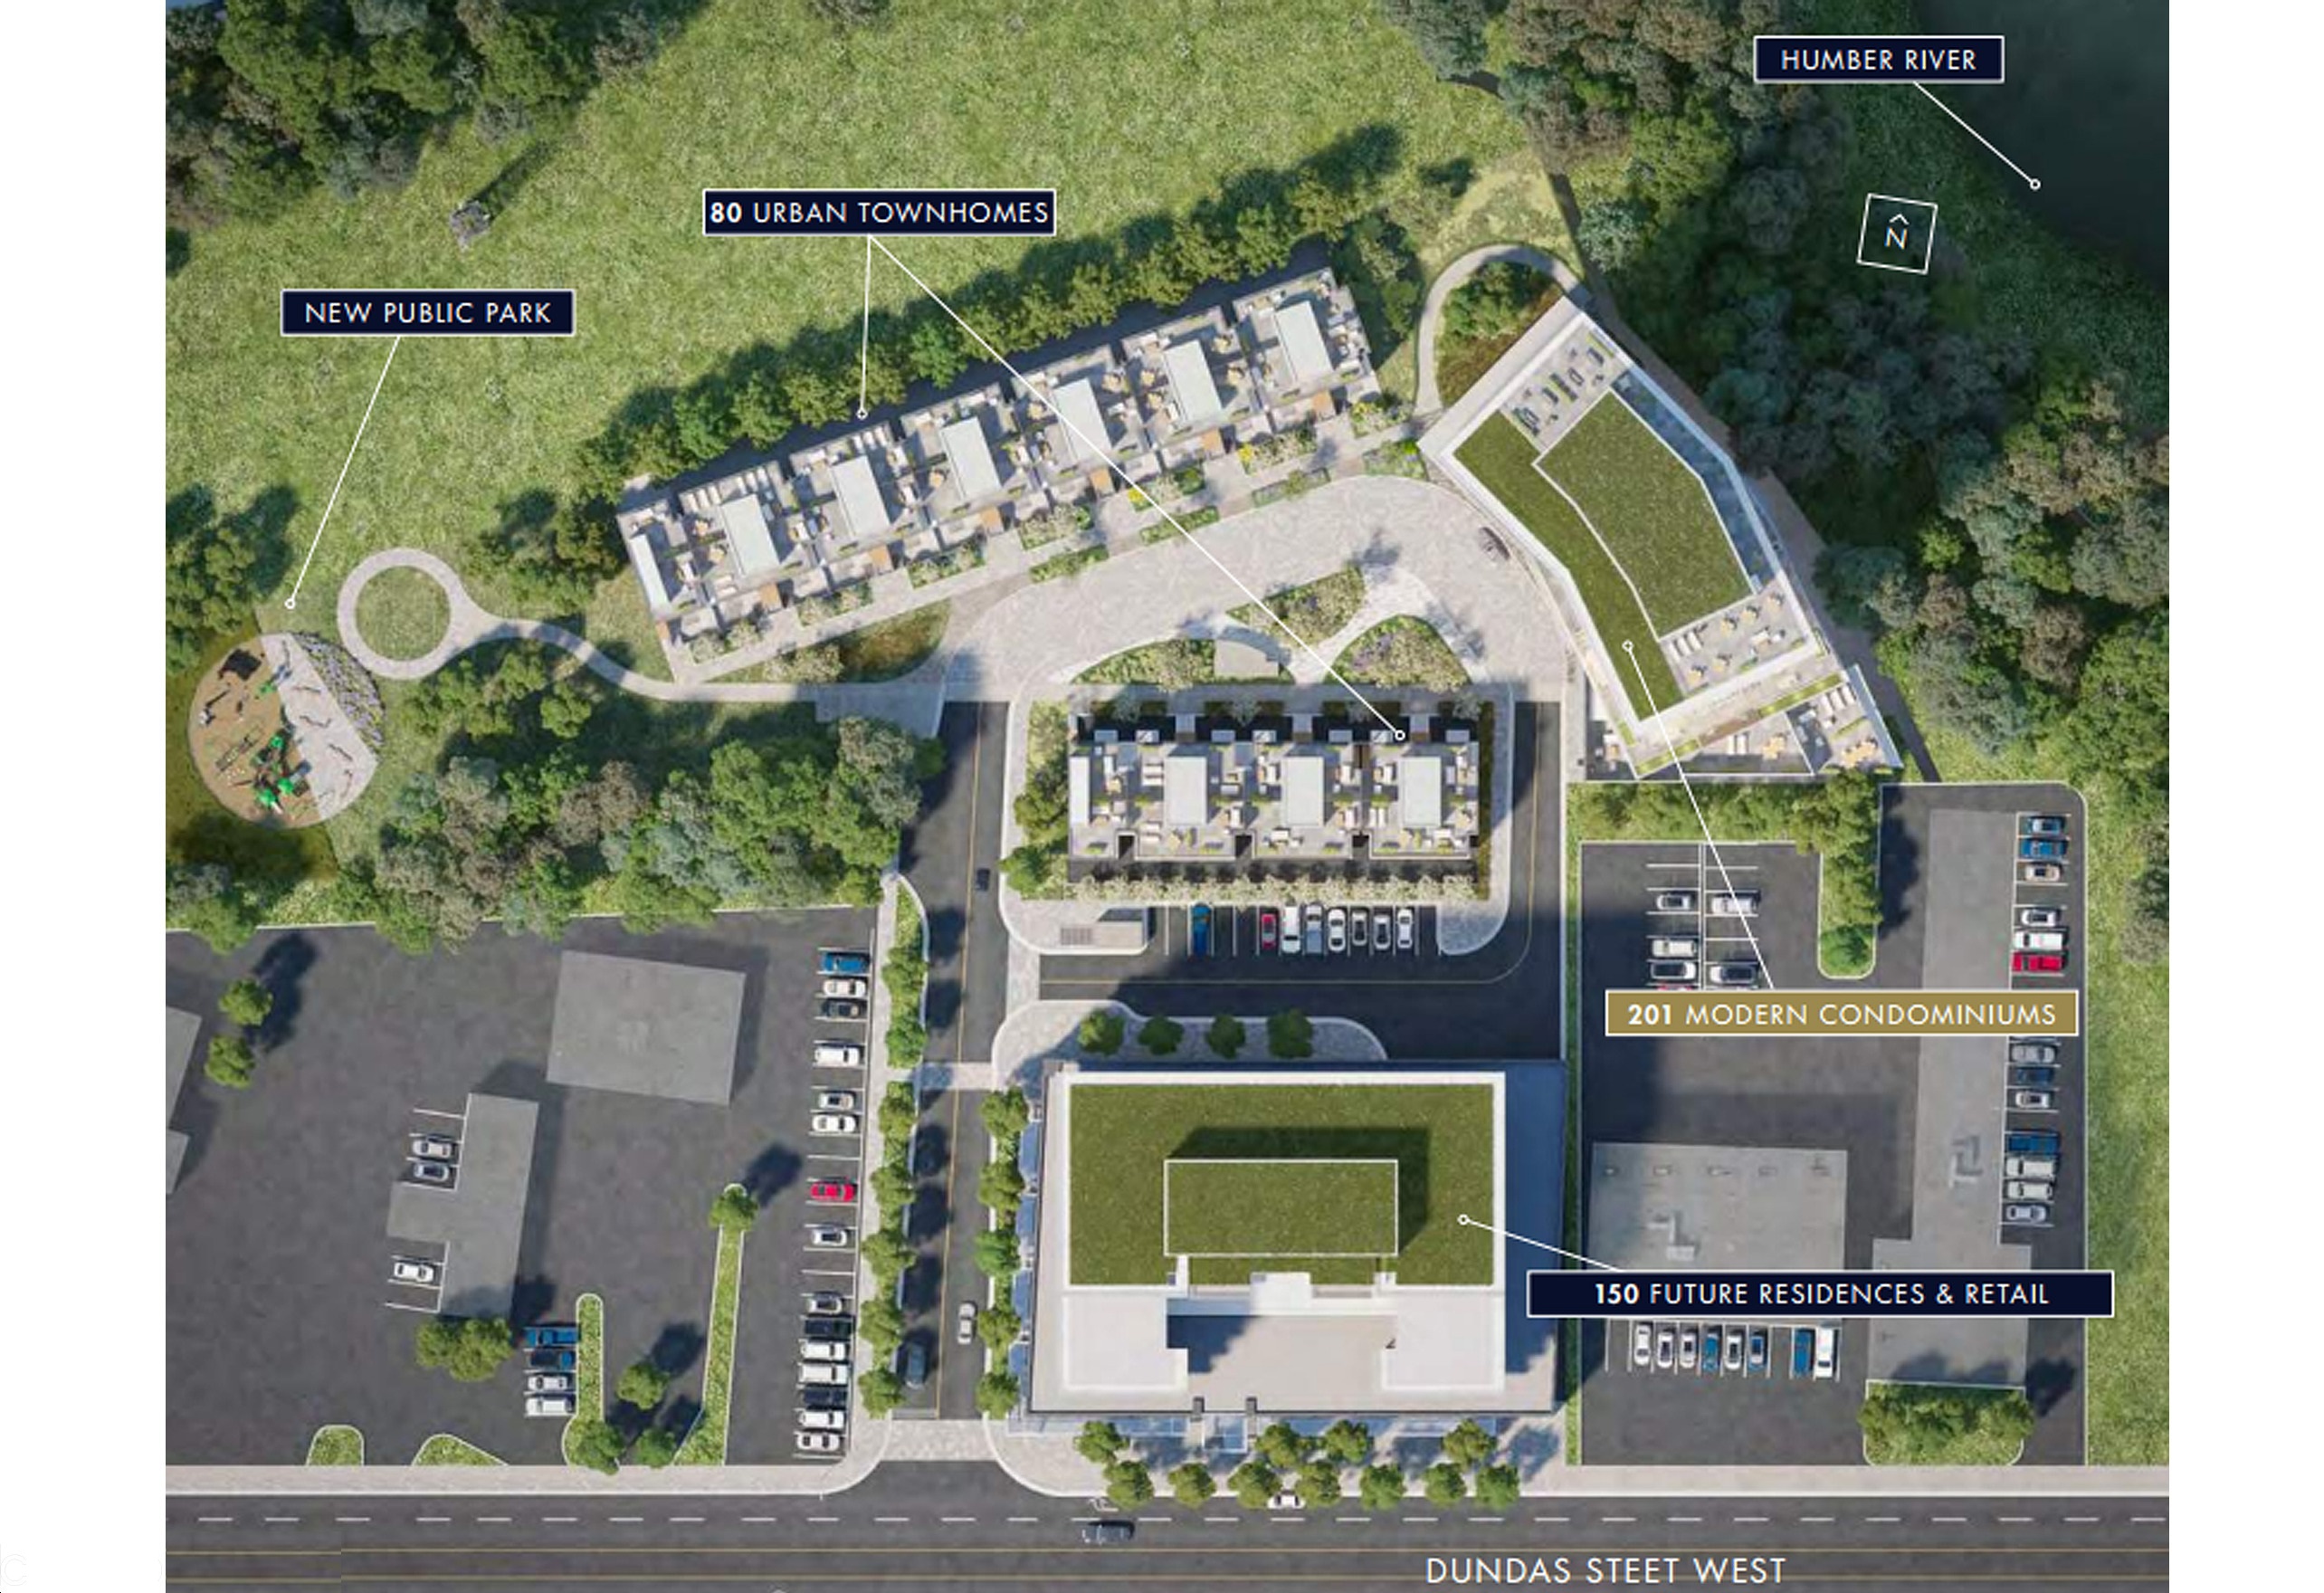 Kingsway-By-The-River-Condos-and-Towns-Siteplan